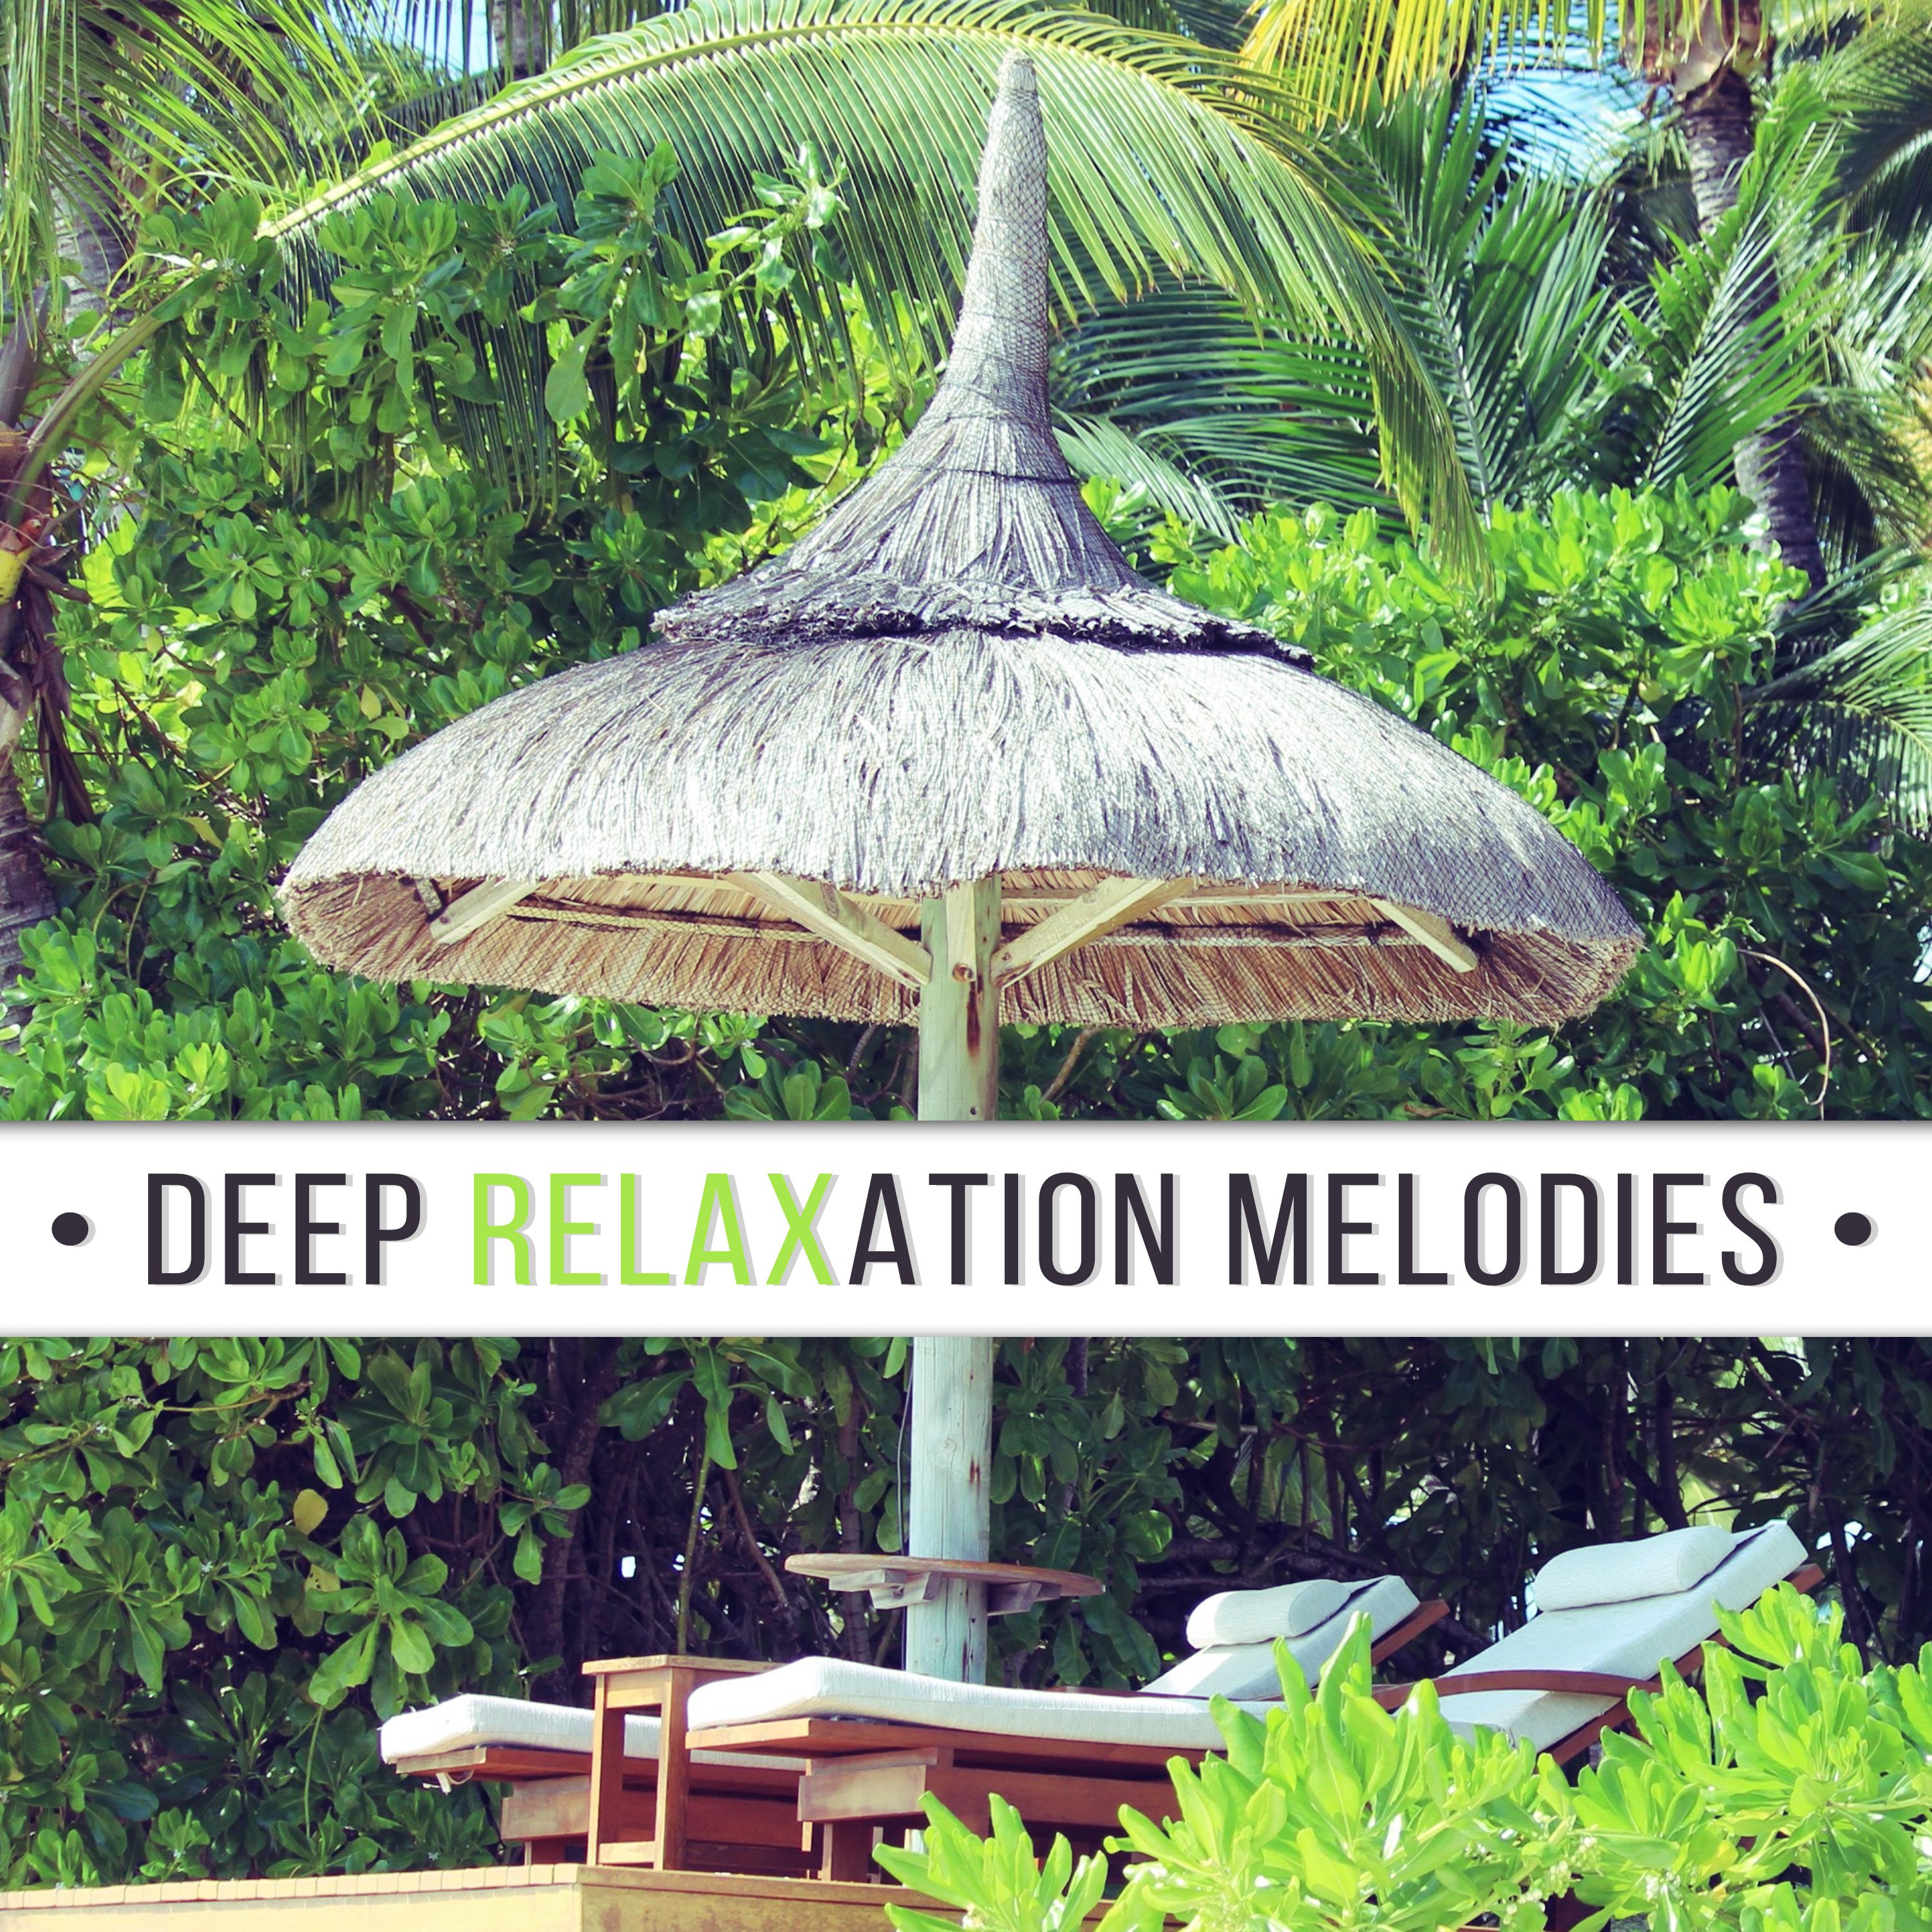 Deep Relaxation Melodies  Summer Chill Out 2017, Calm Down  Rest, Peaceful Music for Holiday, Clear Mind